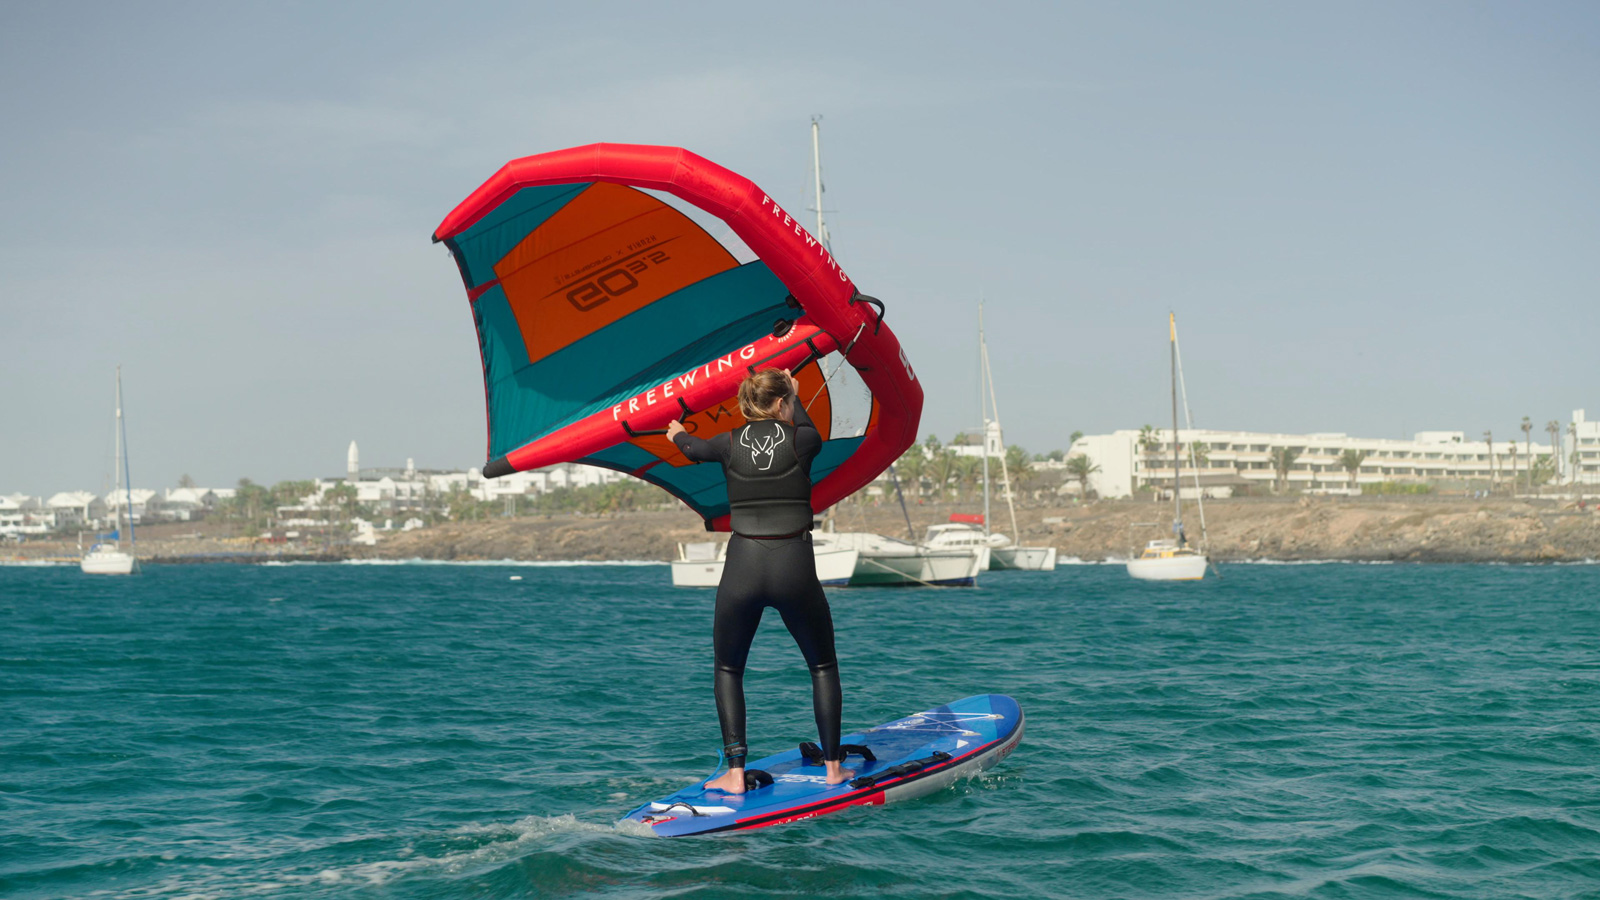 5 Tips for Wingfoiling in Light Wind Conditions - Wingsurfing Magazine